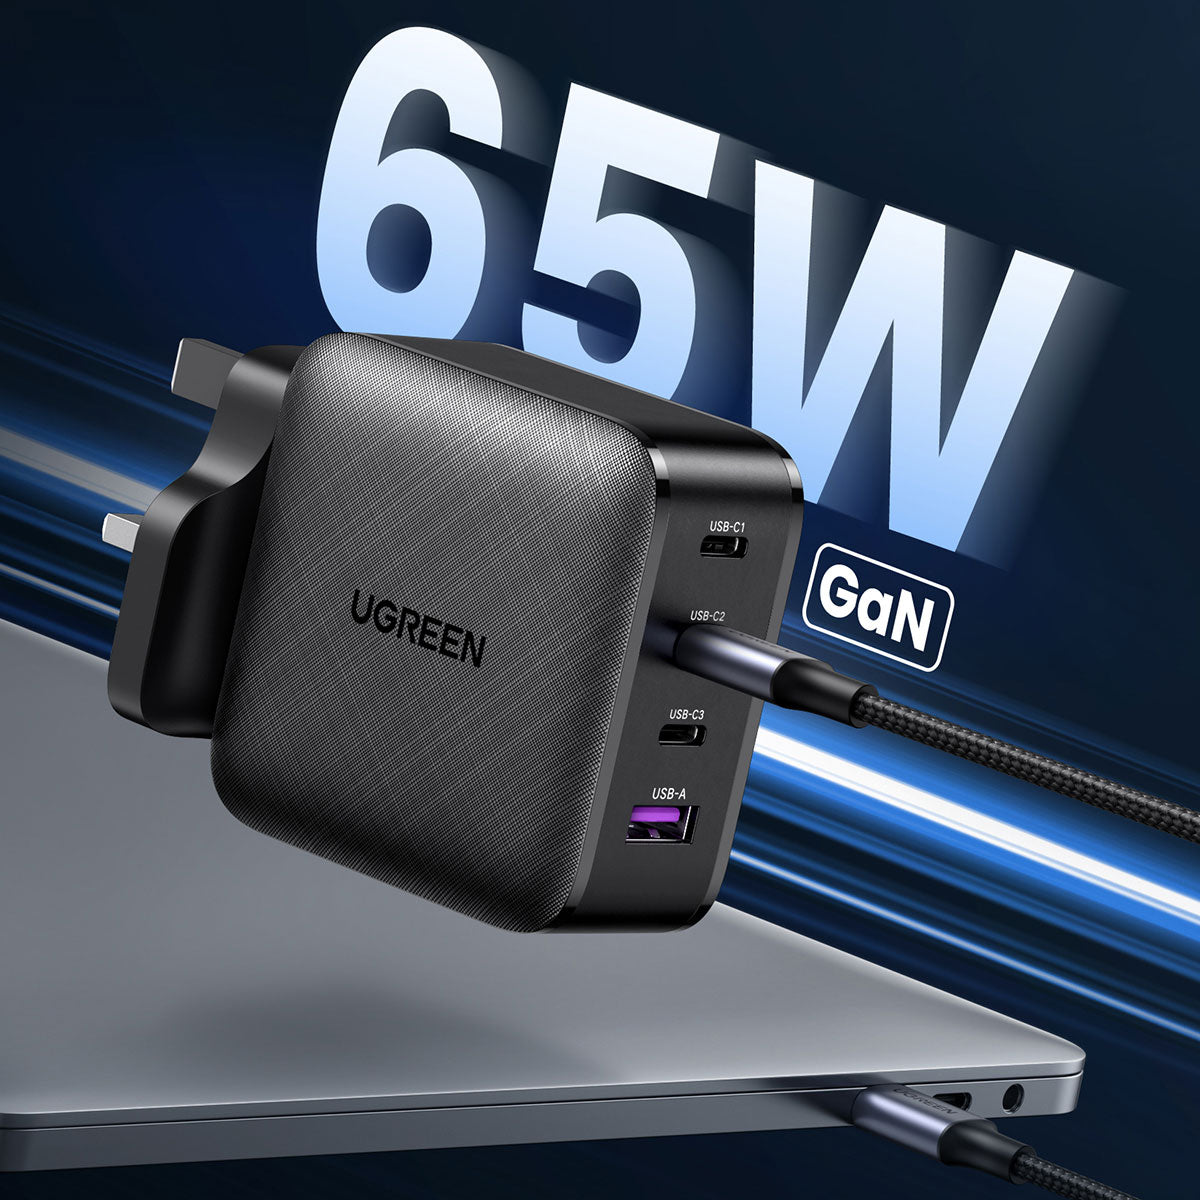 UGREEN 65W USB Wall Charger (4-Ports) 插牆式USB充電器 充電器 Microworks Online Store